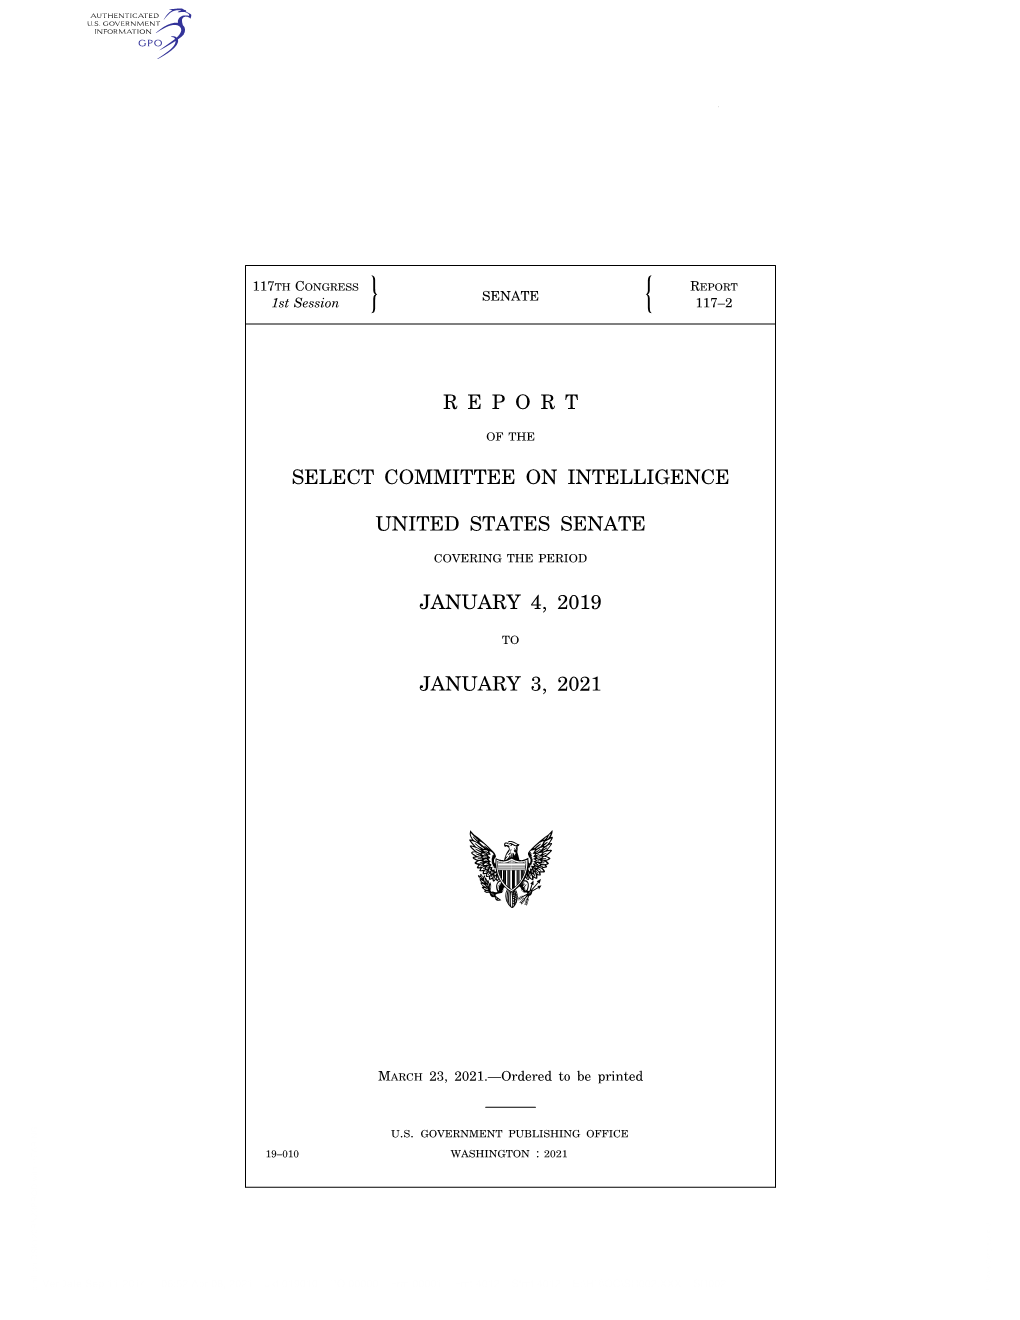 Report of the Senate Select Committee on Intelligence On